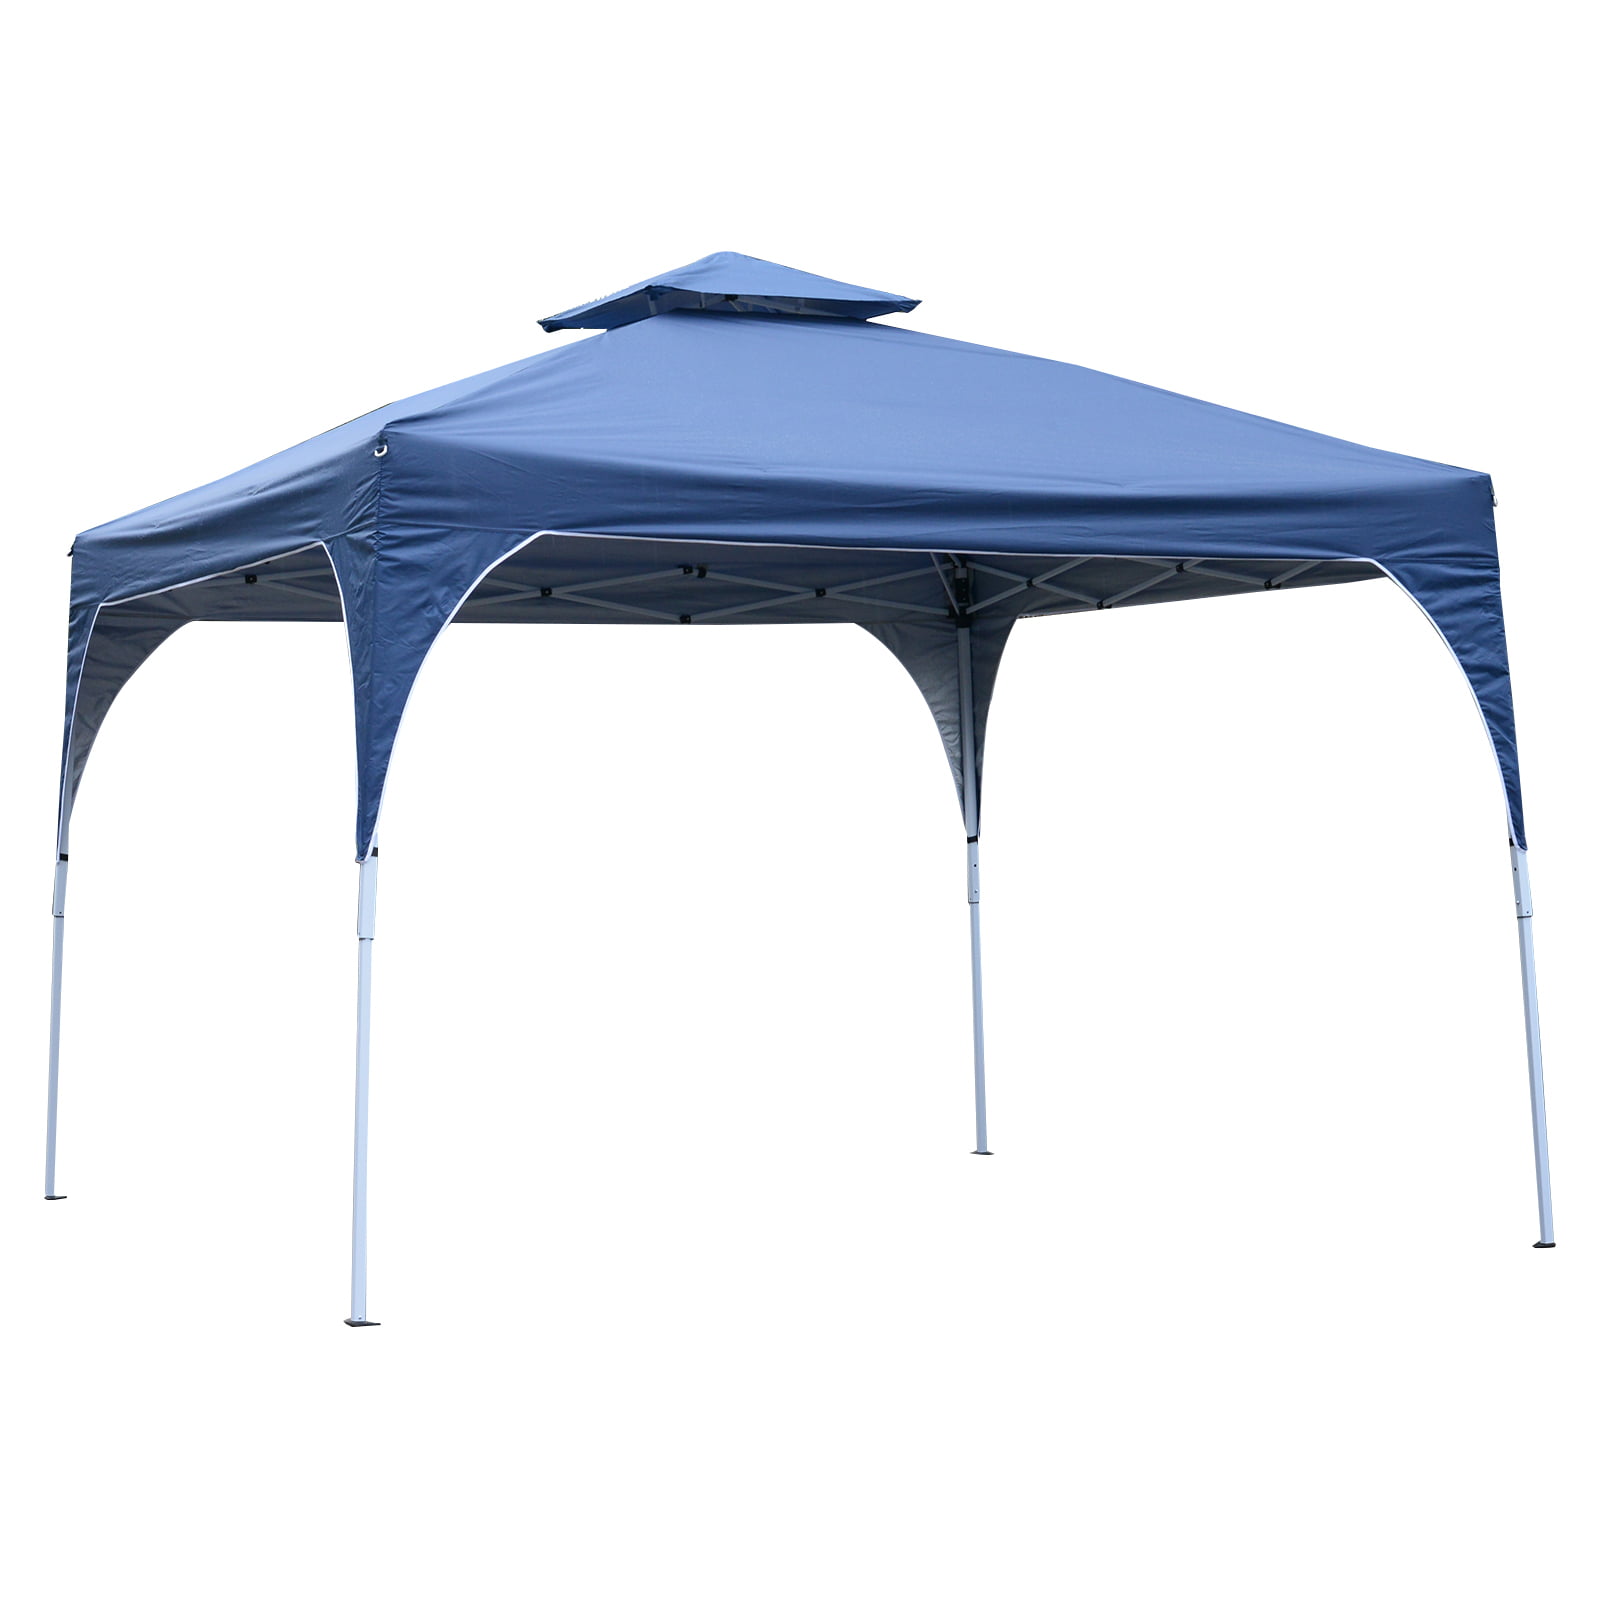 Party Gazebo Tent Event Shelter Outdoor Sunshade with Carrying Bag Blue 